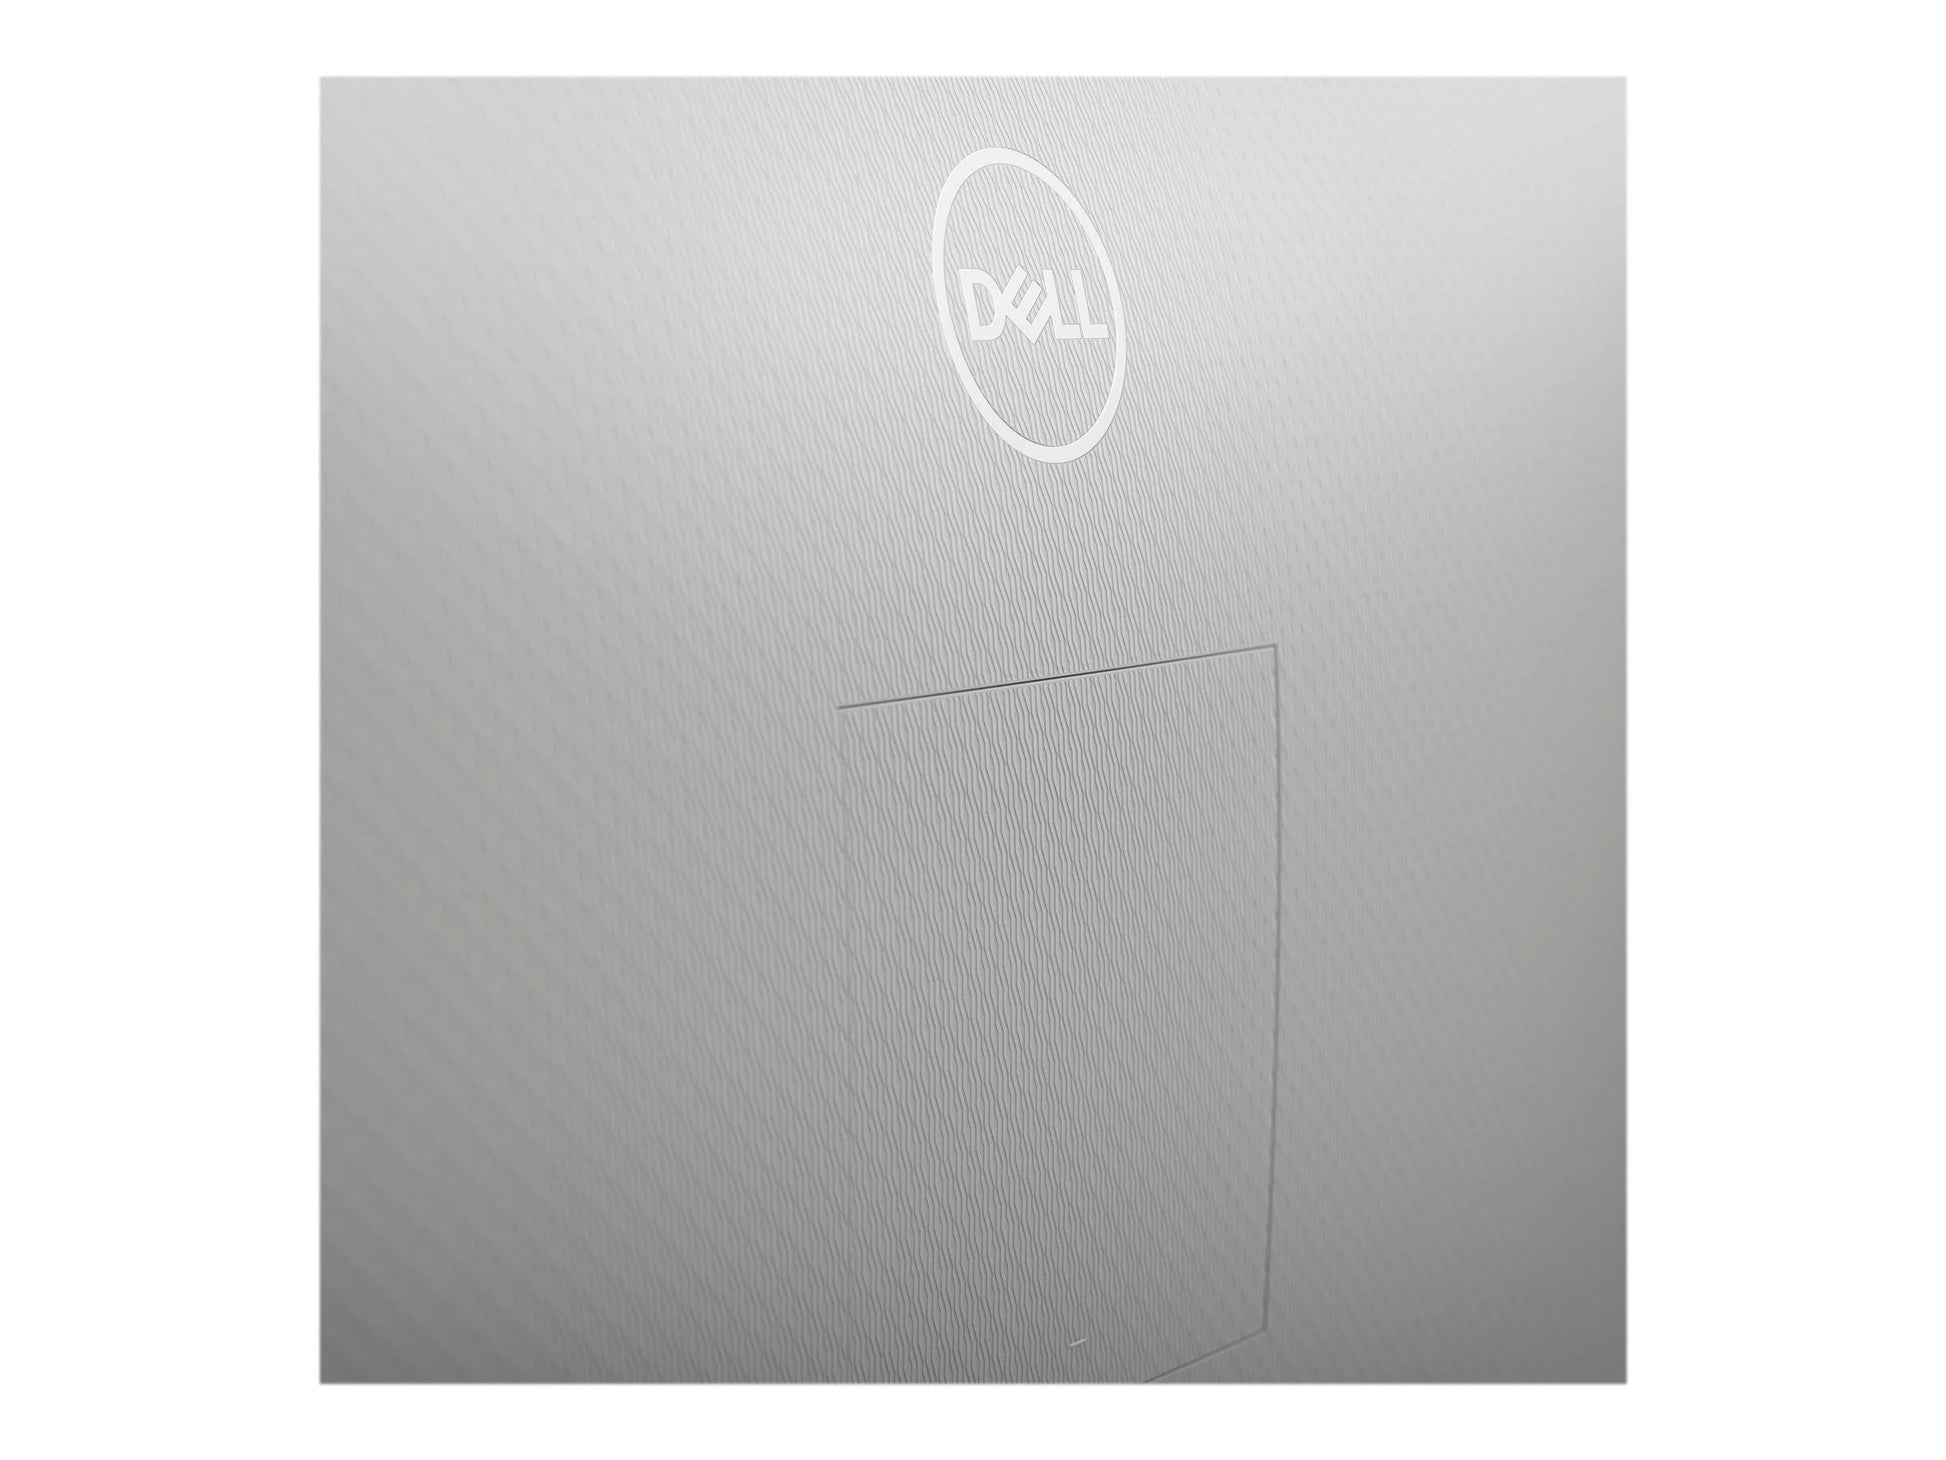 Dell 23.8" Full HD IPS Monitor with 2x HDMI - Energy Efficient